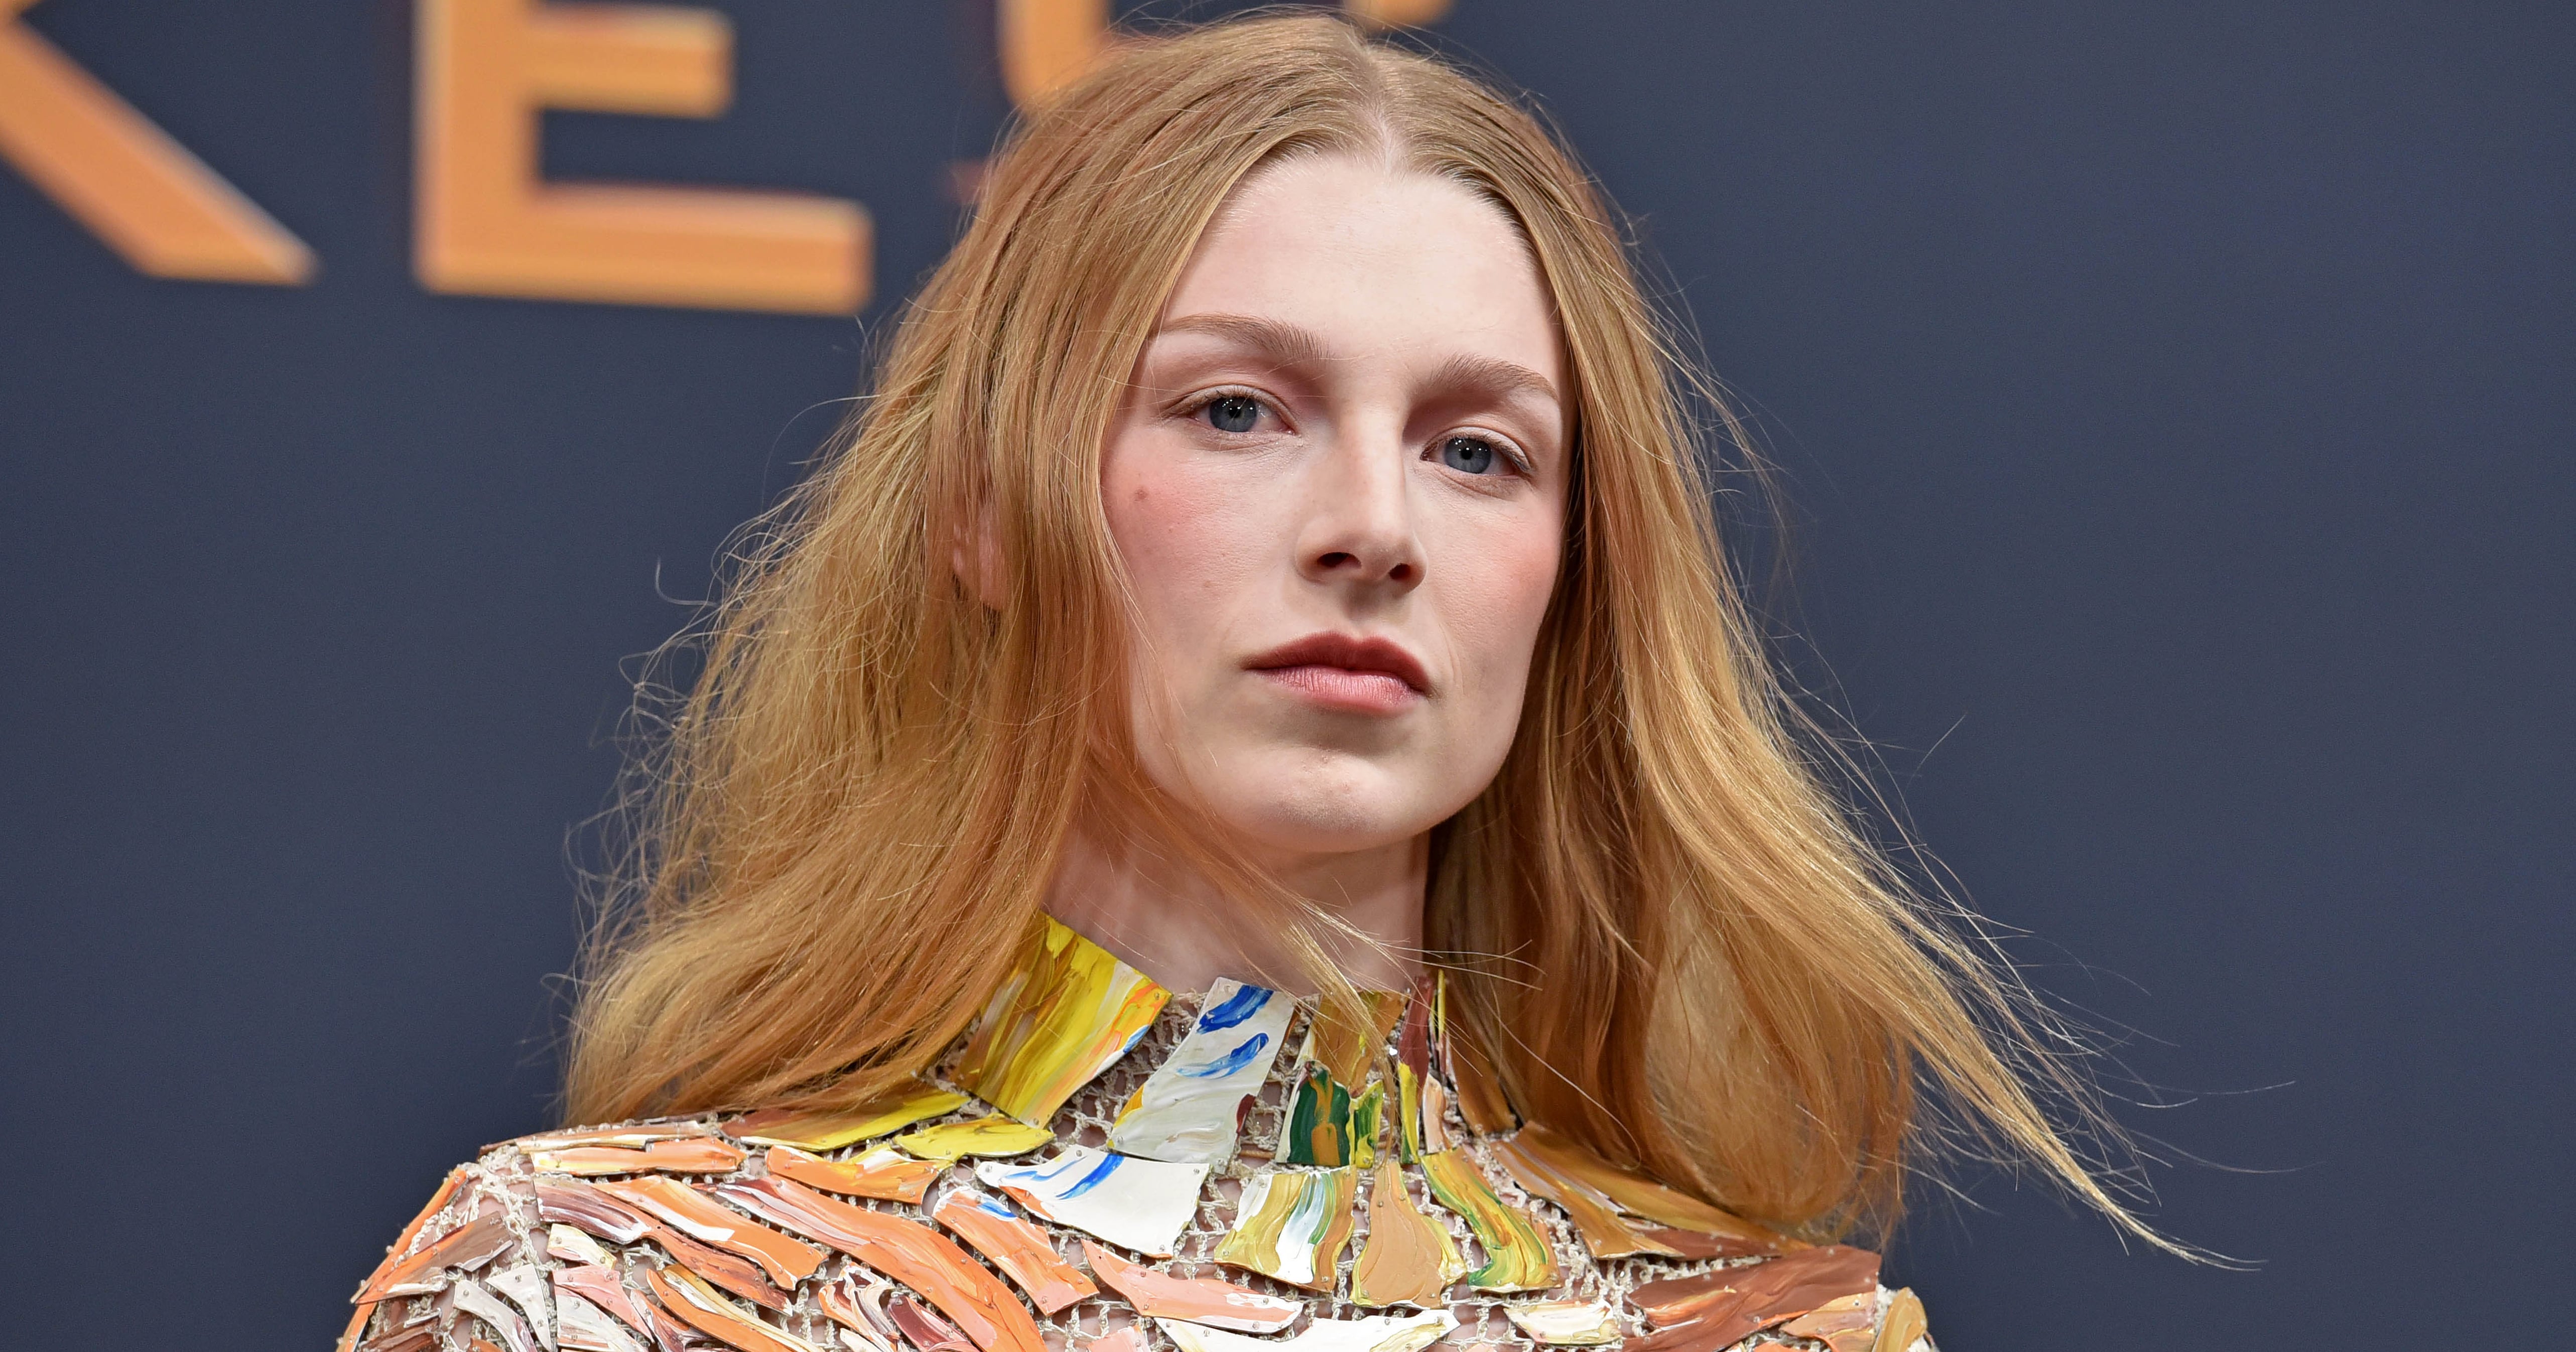 Hunter Schafer Drips Down the Red Carpet in a Hand-Painted Puzzle-Piece Dress